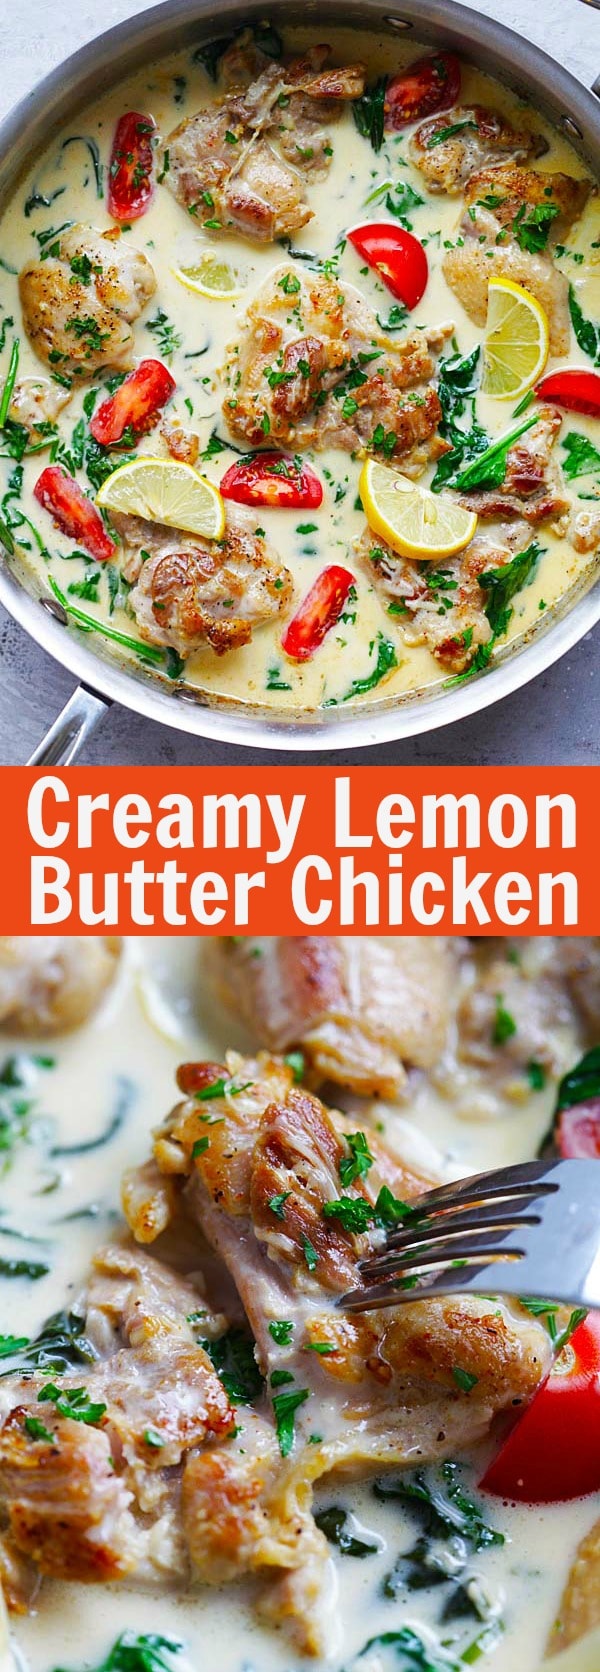 Lemon Butter Chicken - juicy and moist pan-fried chicken in a super creamy, lemony and cheesy white sauce, with spinach and tomatoes | rasamalaysia.com